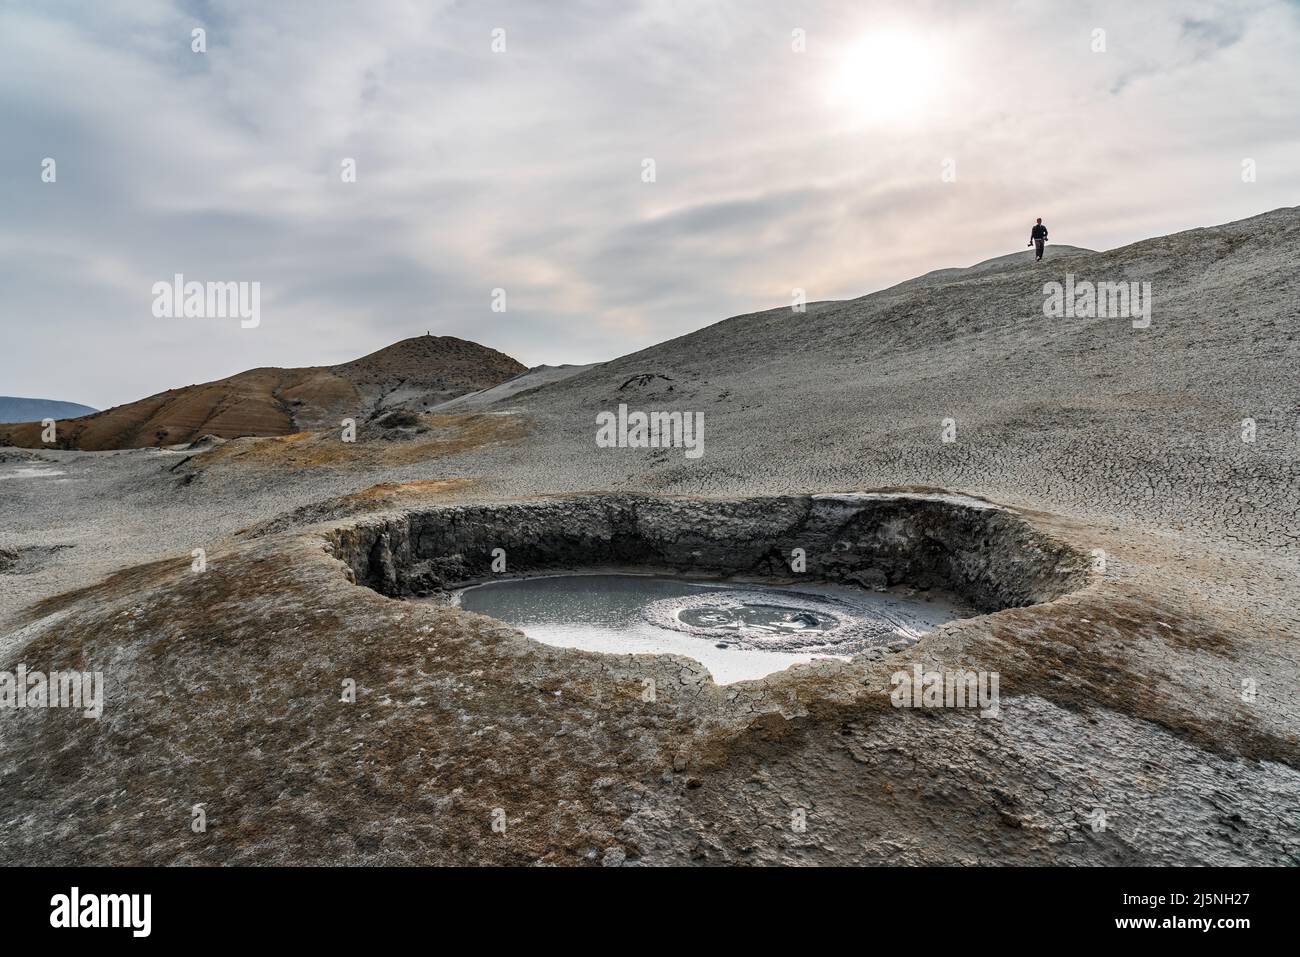 Mud volcano in mountains. Amazing natural phenomenon of the earth Stock Photo